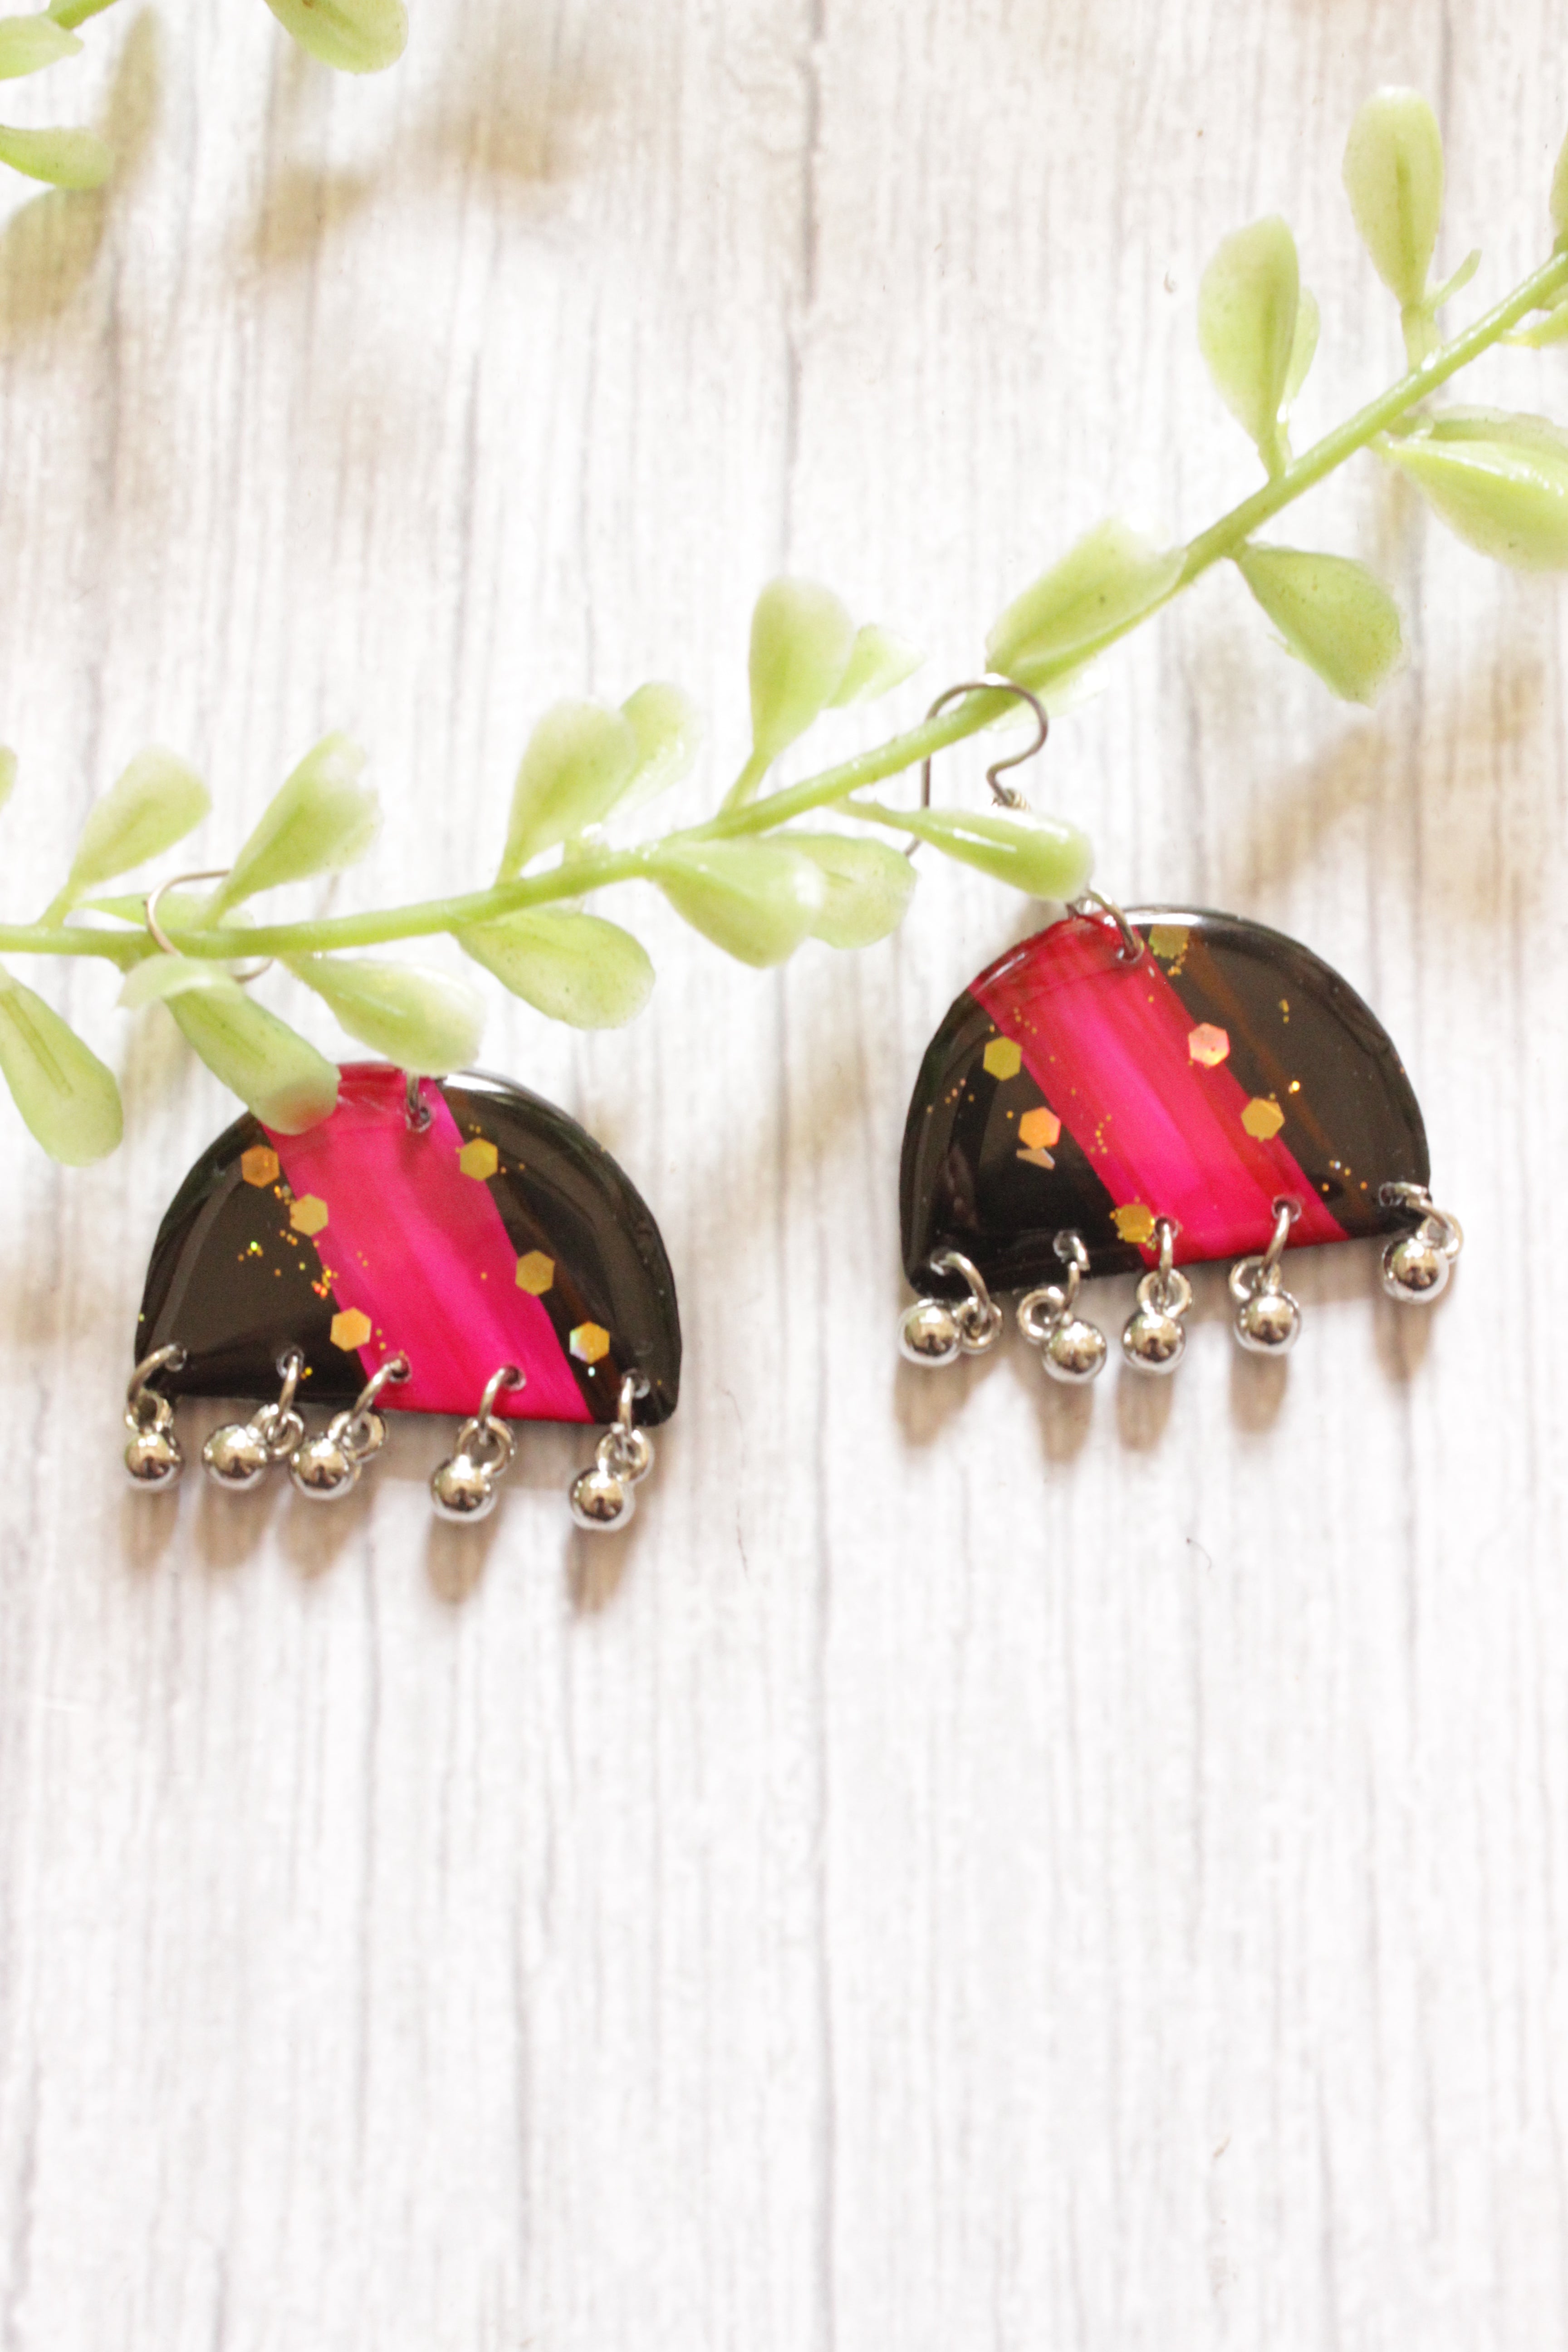 Dome Shaped Black and Pink Hand Painted Resin Earrings